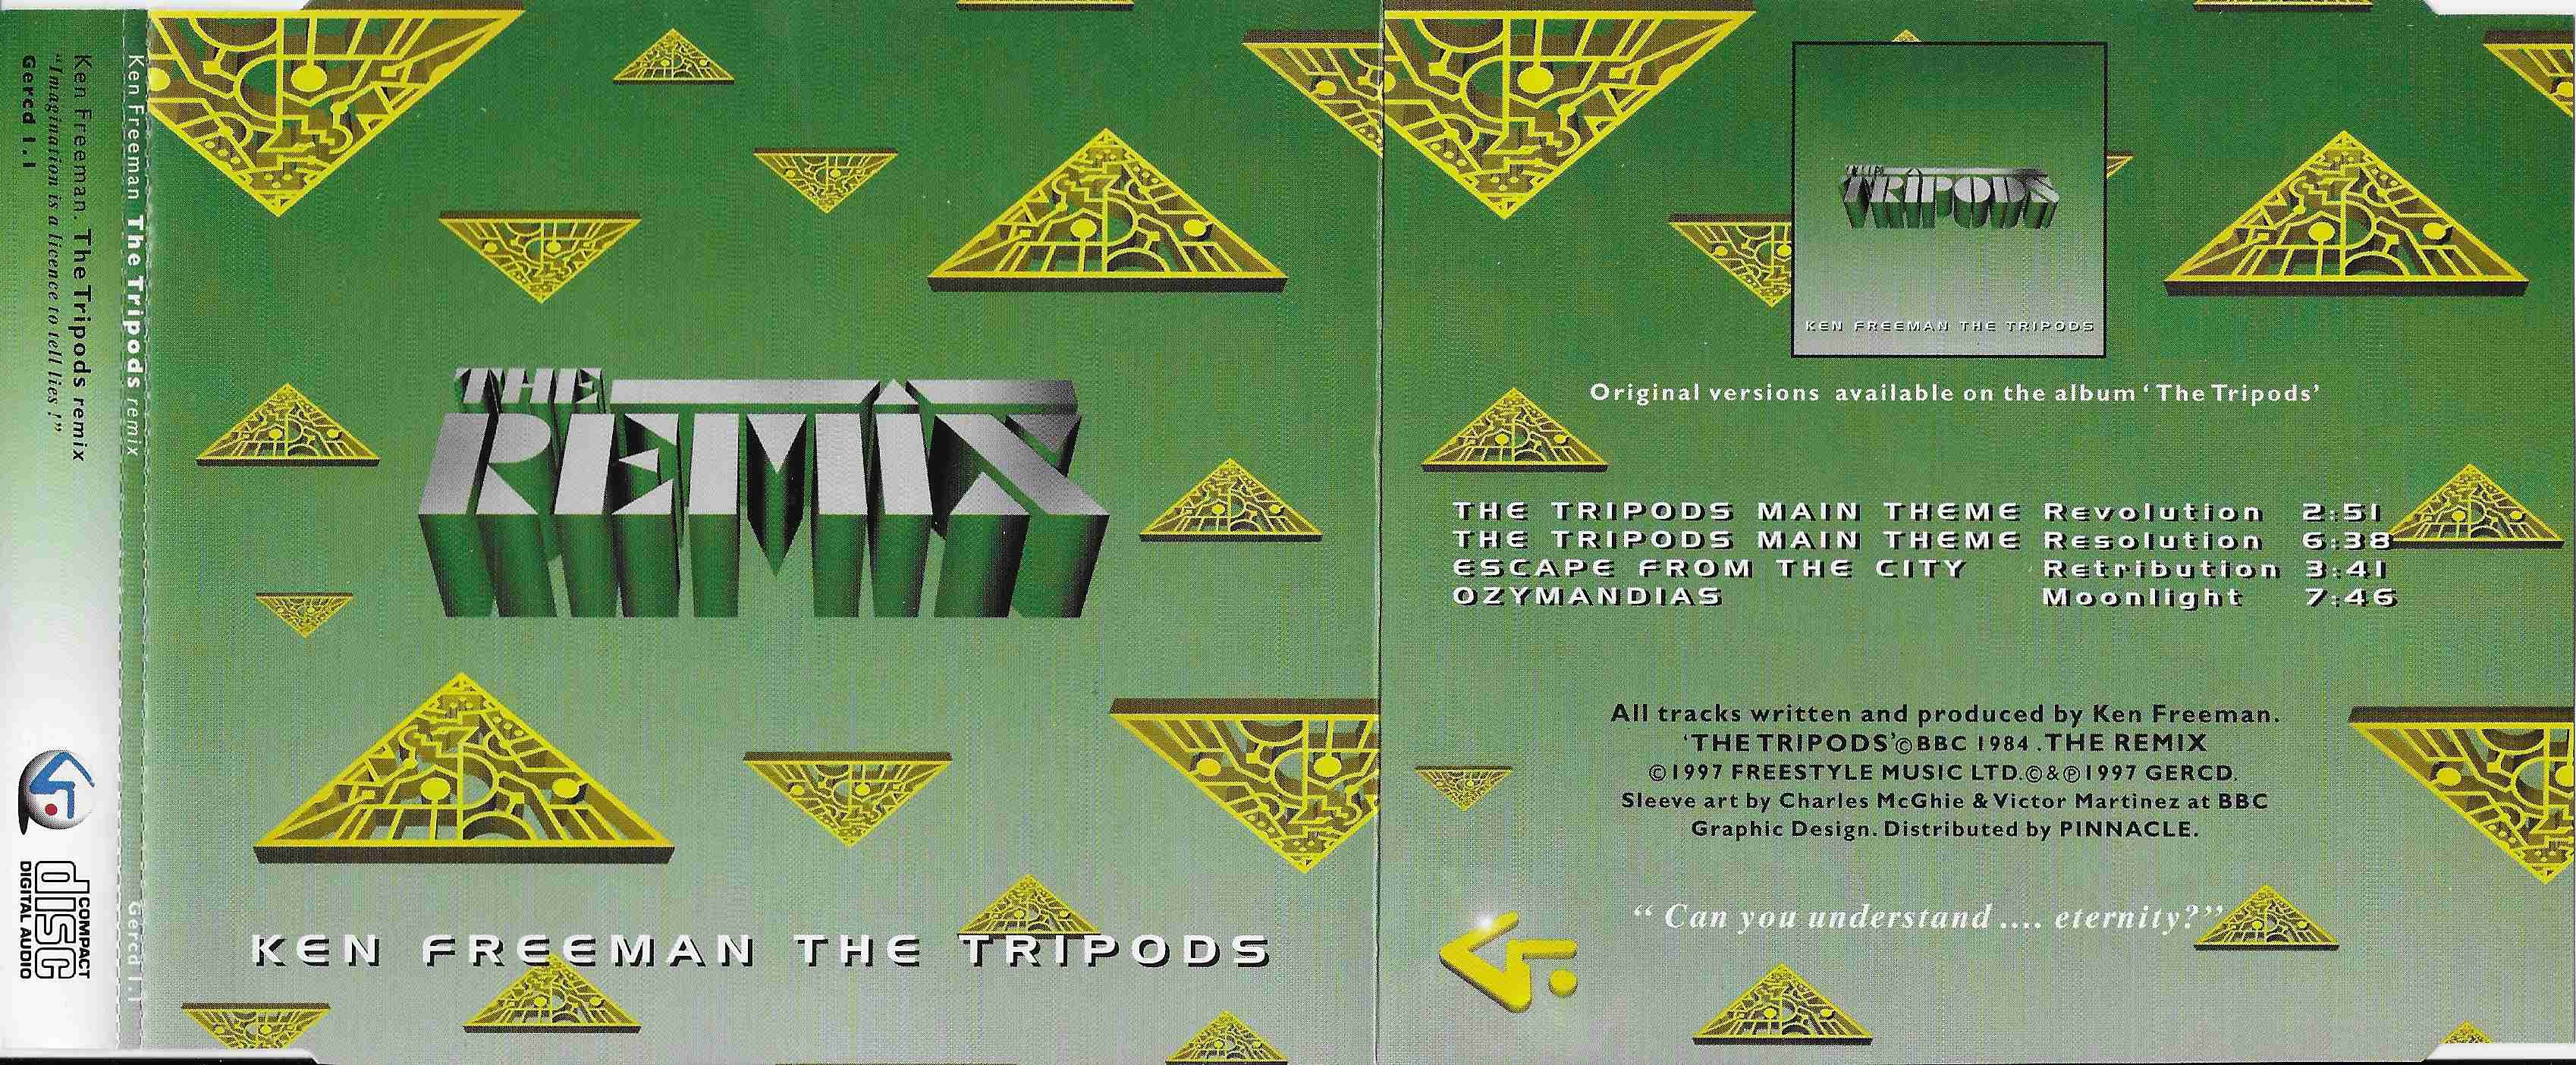 Picture of GERCD 1.1 The tripods remix by artist Ken Freeman from the BBC records and Tapes library